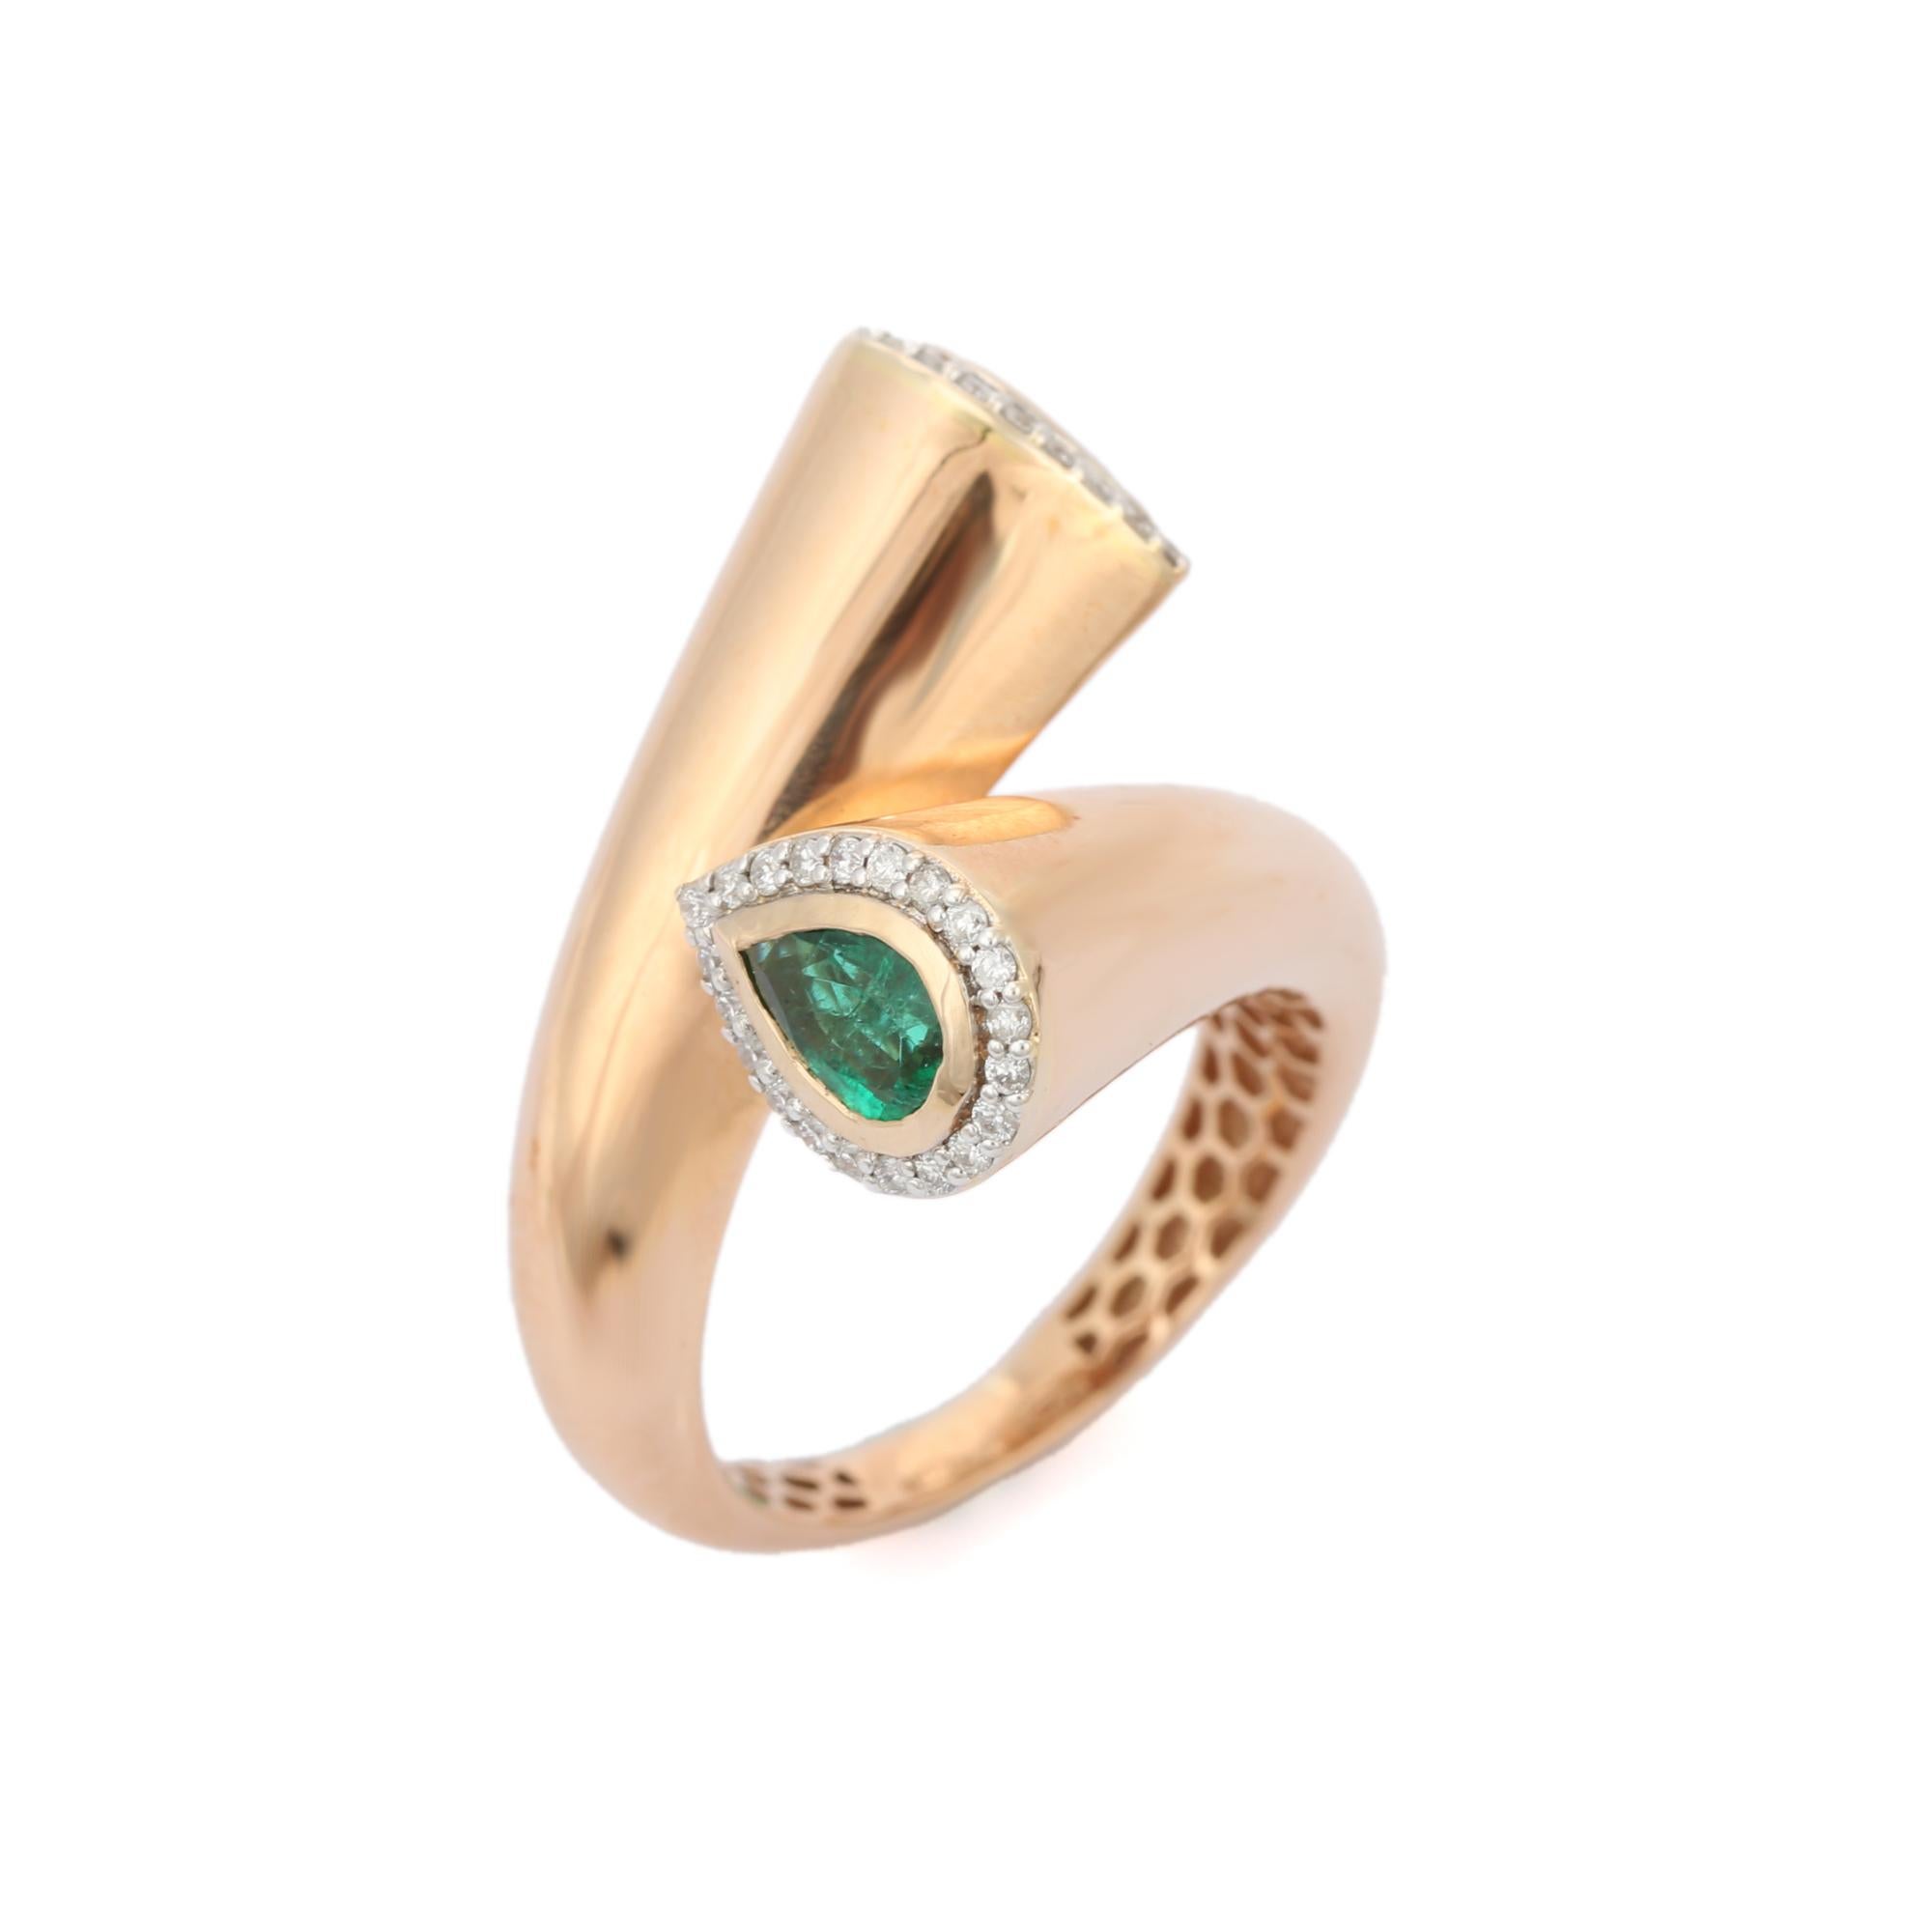 For Sale:  Unique 18k Solid Yellow Gold Emerald and Diamond Bypass Ring 4